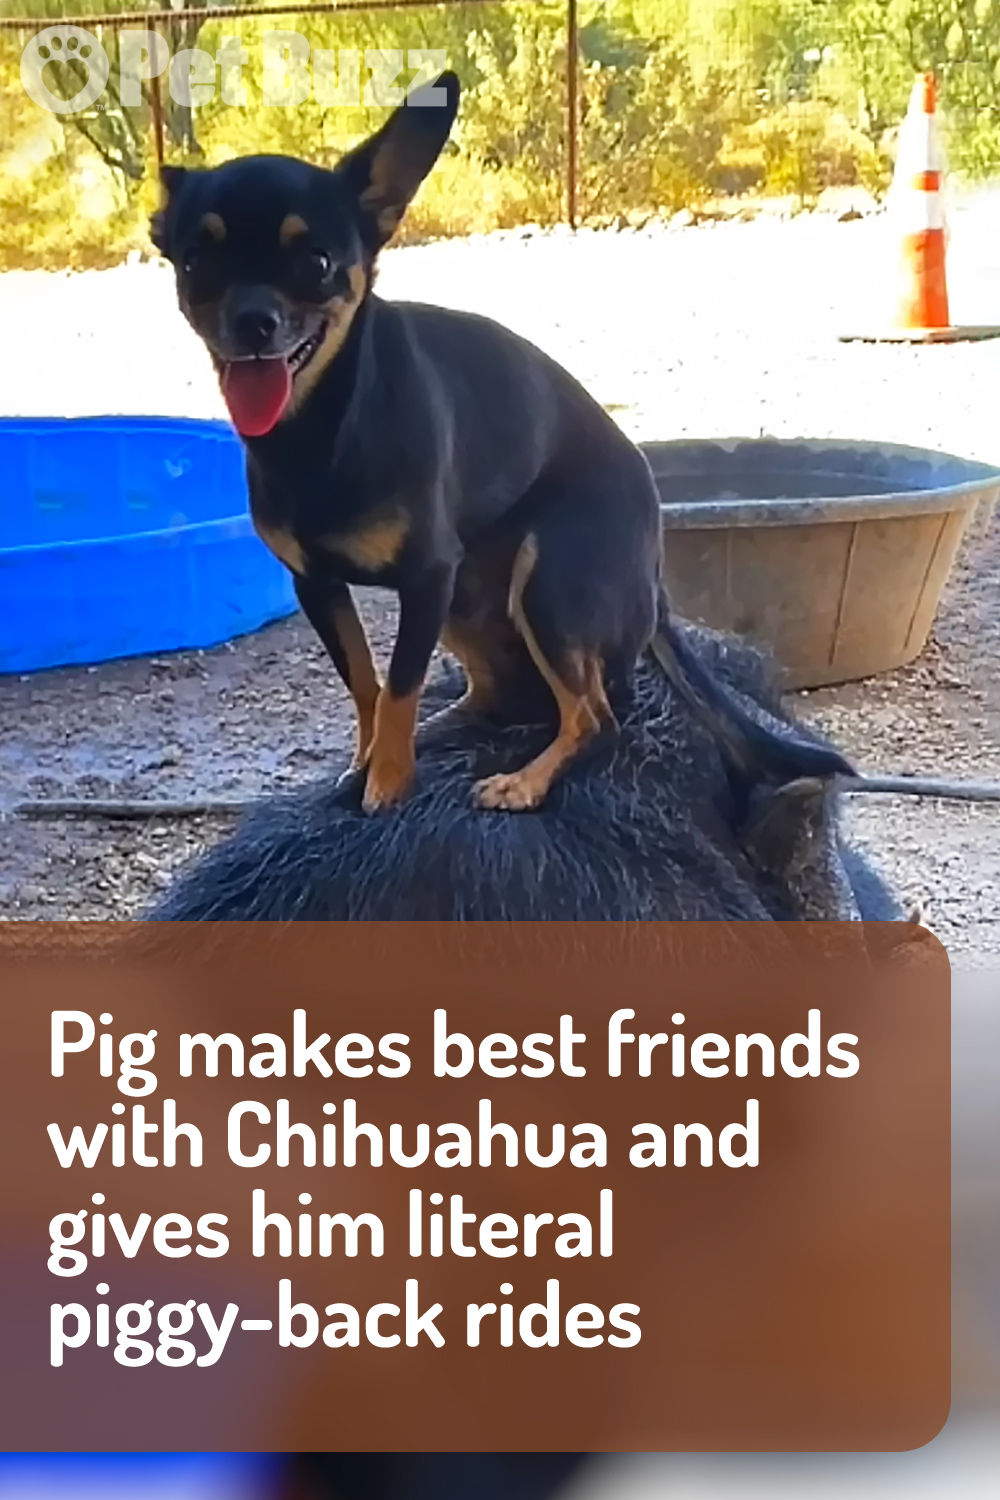 Pig makes best friends with Chihuahua and gives him literal piggy-back rides